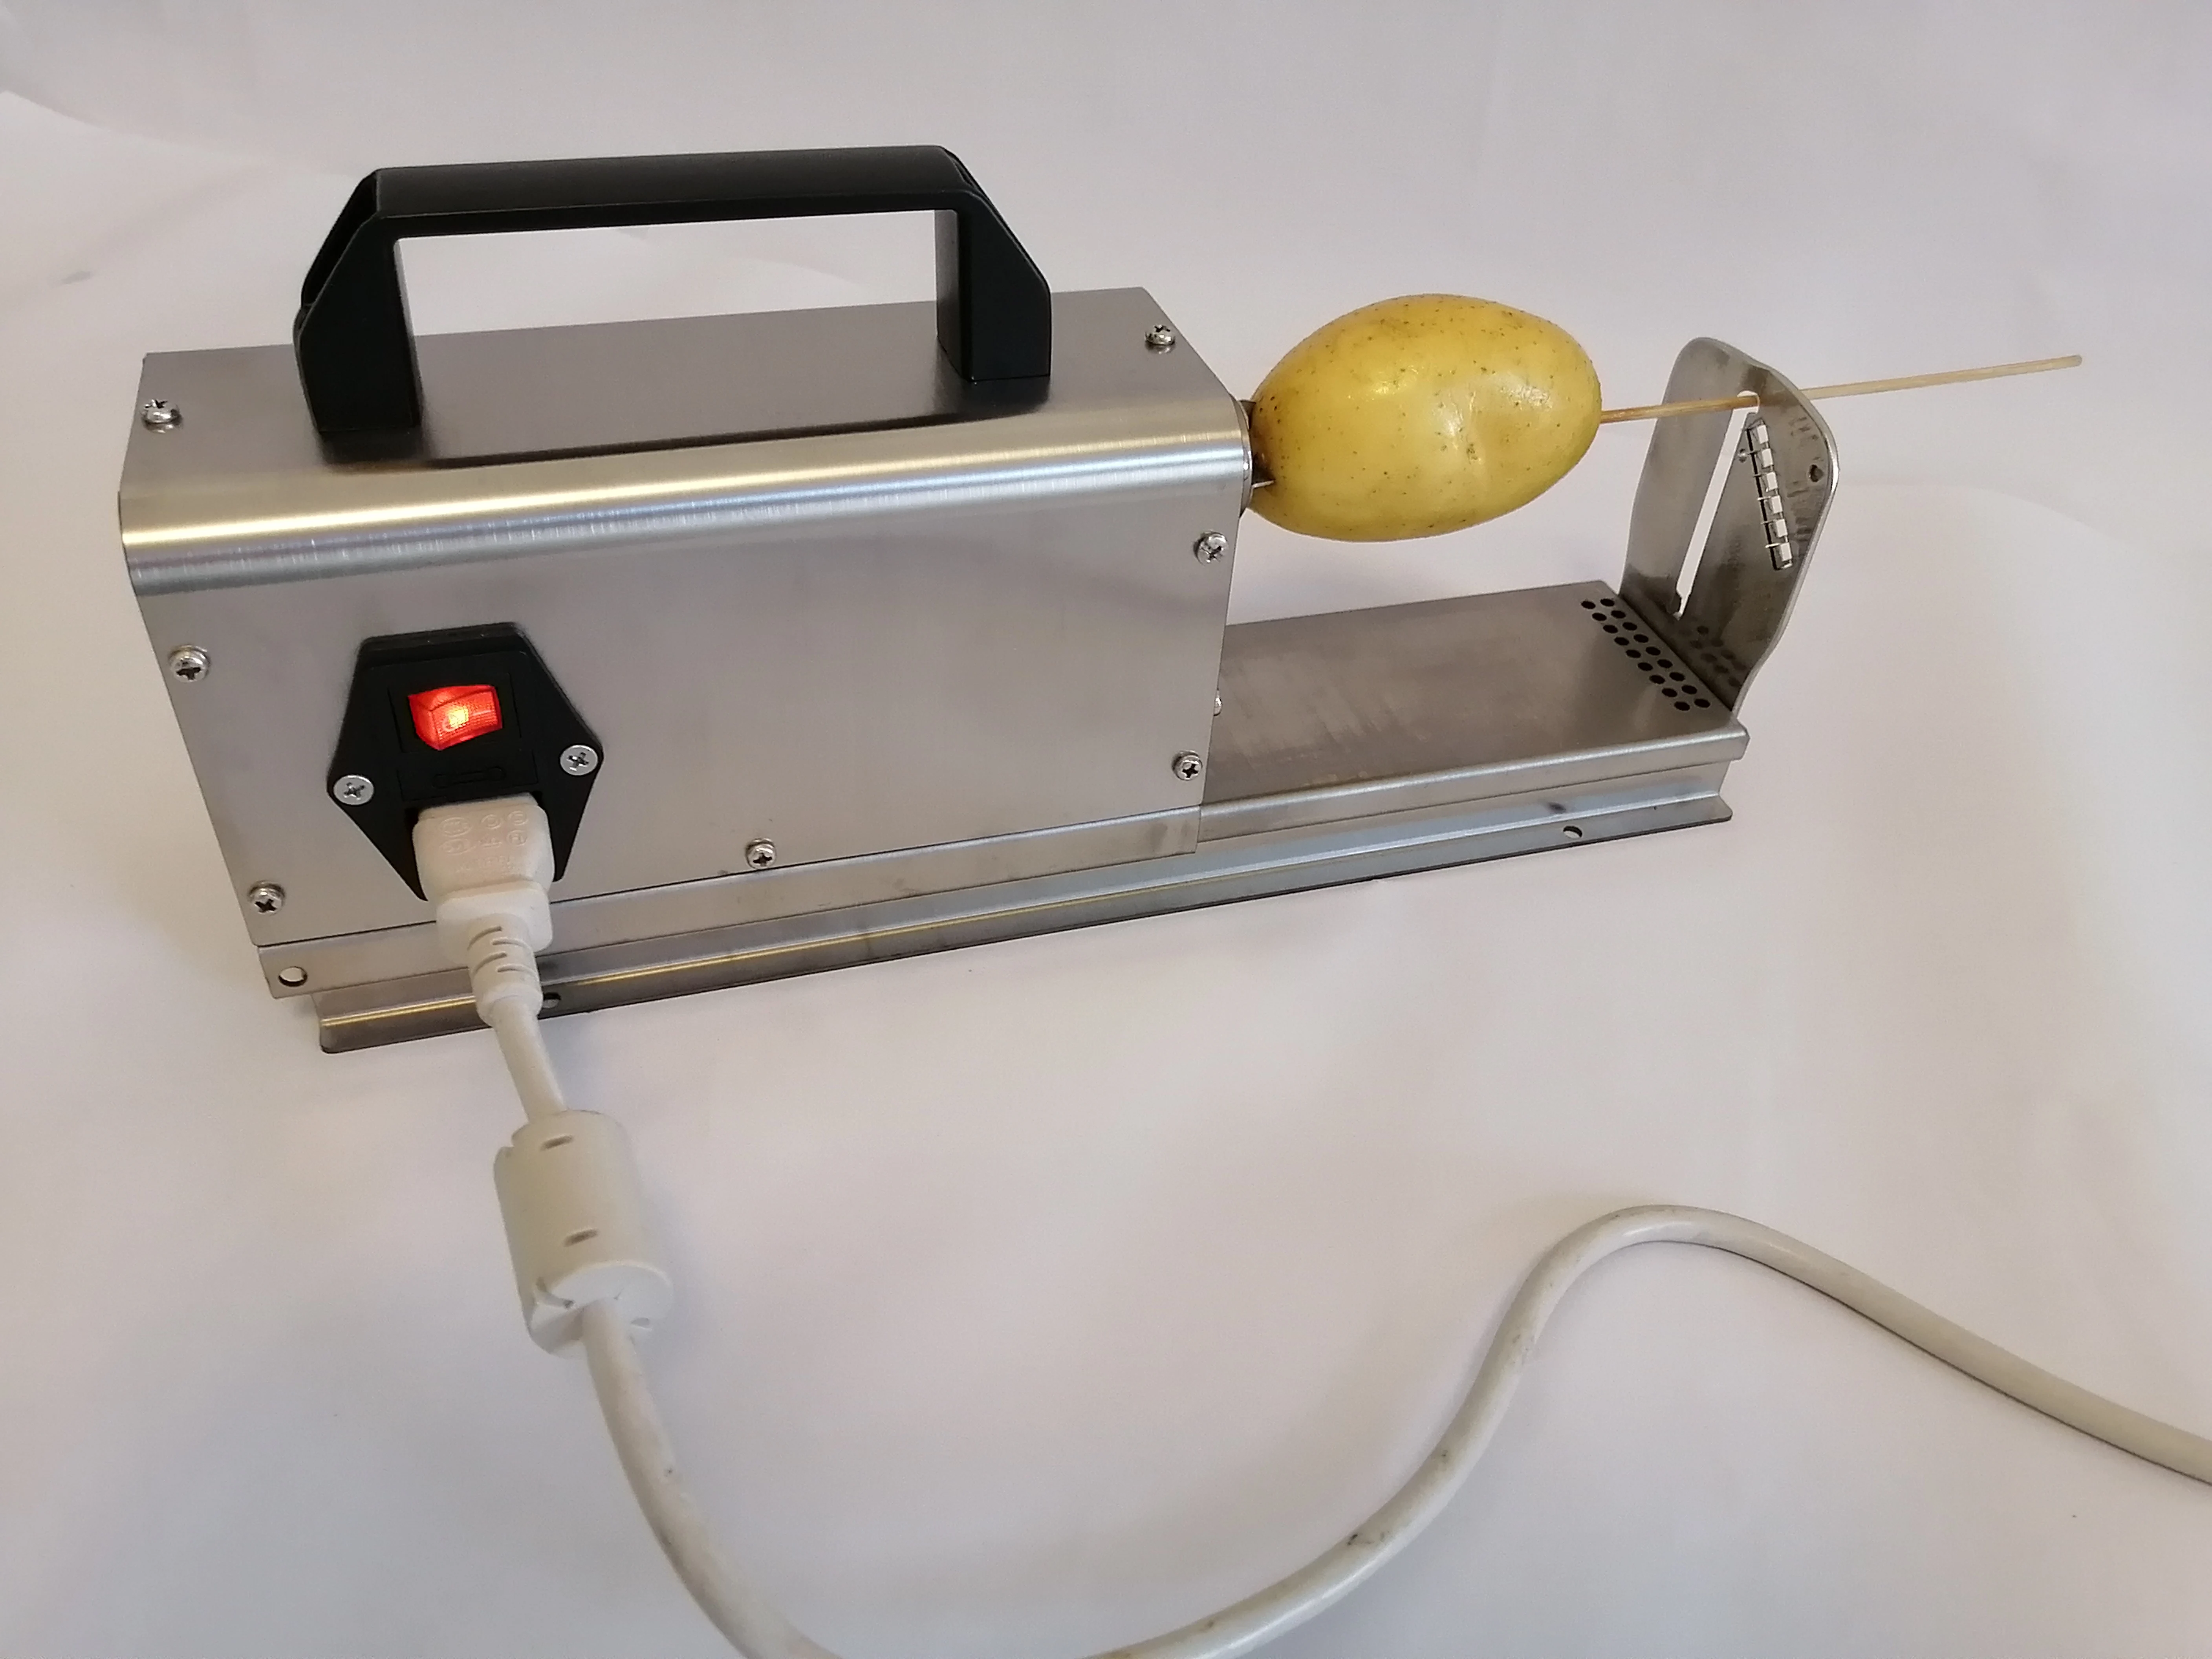 https://ae01.alicdn.com/kf/S49dfa2d601d641979ceddd261d2df6989/Electric-Potato-Spiral-Cutter-Automatic-Potato-Tower-Machine-Stainless-Steel-Twisted-French-Fries-Slicer-Potato-Chips.jpg